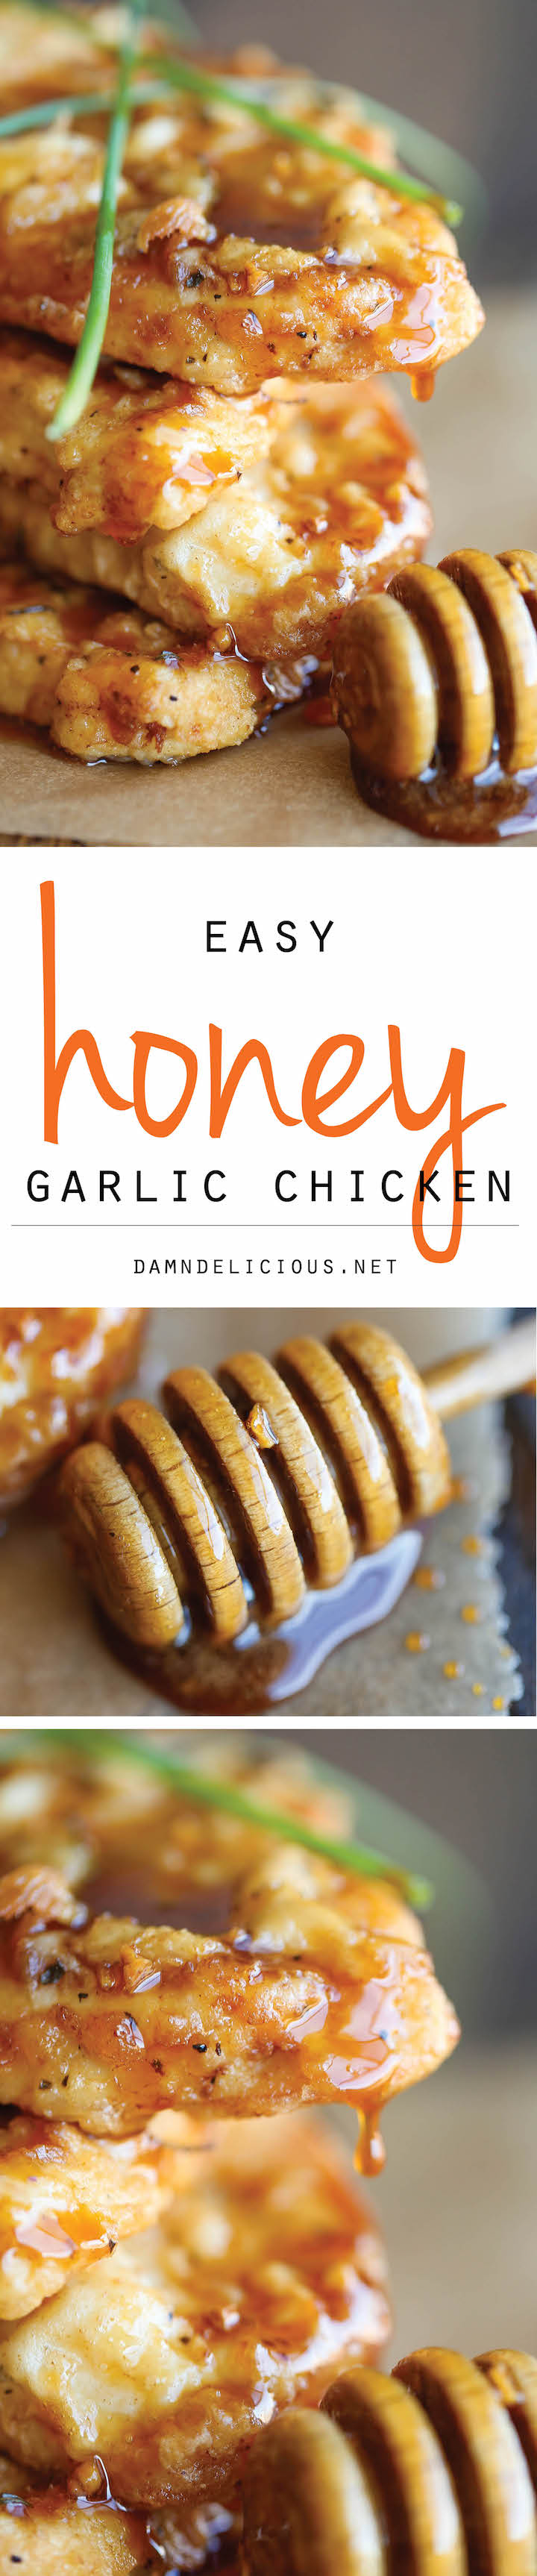 Honey Garlic Chicken - The most amazing crisp-tender chicken with a honey garlic sauce that is out of this world!